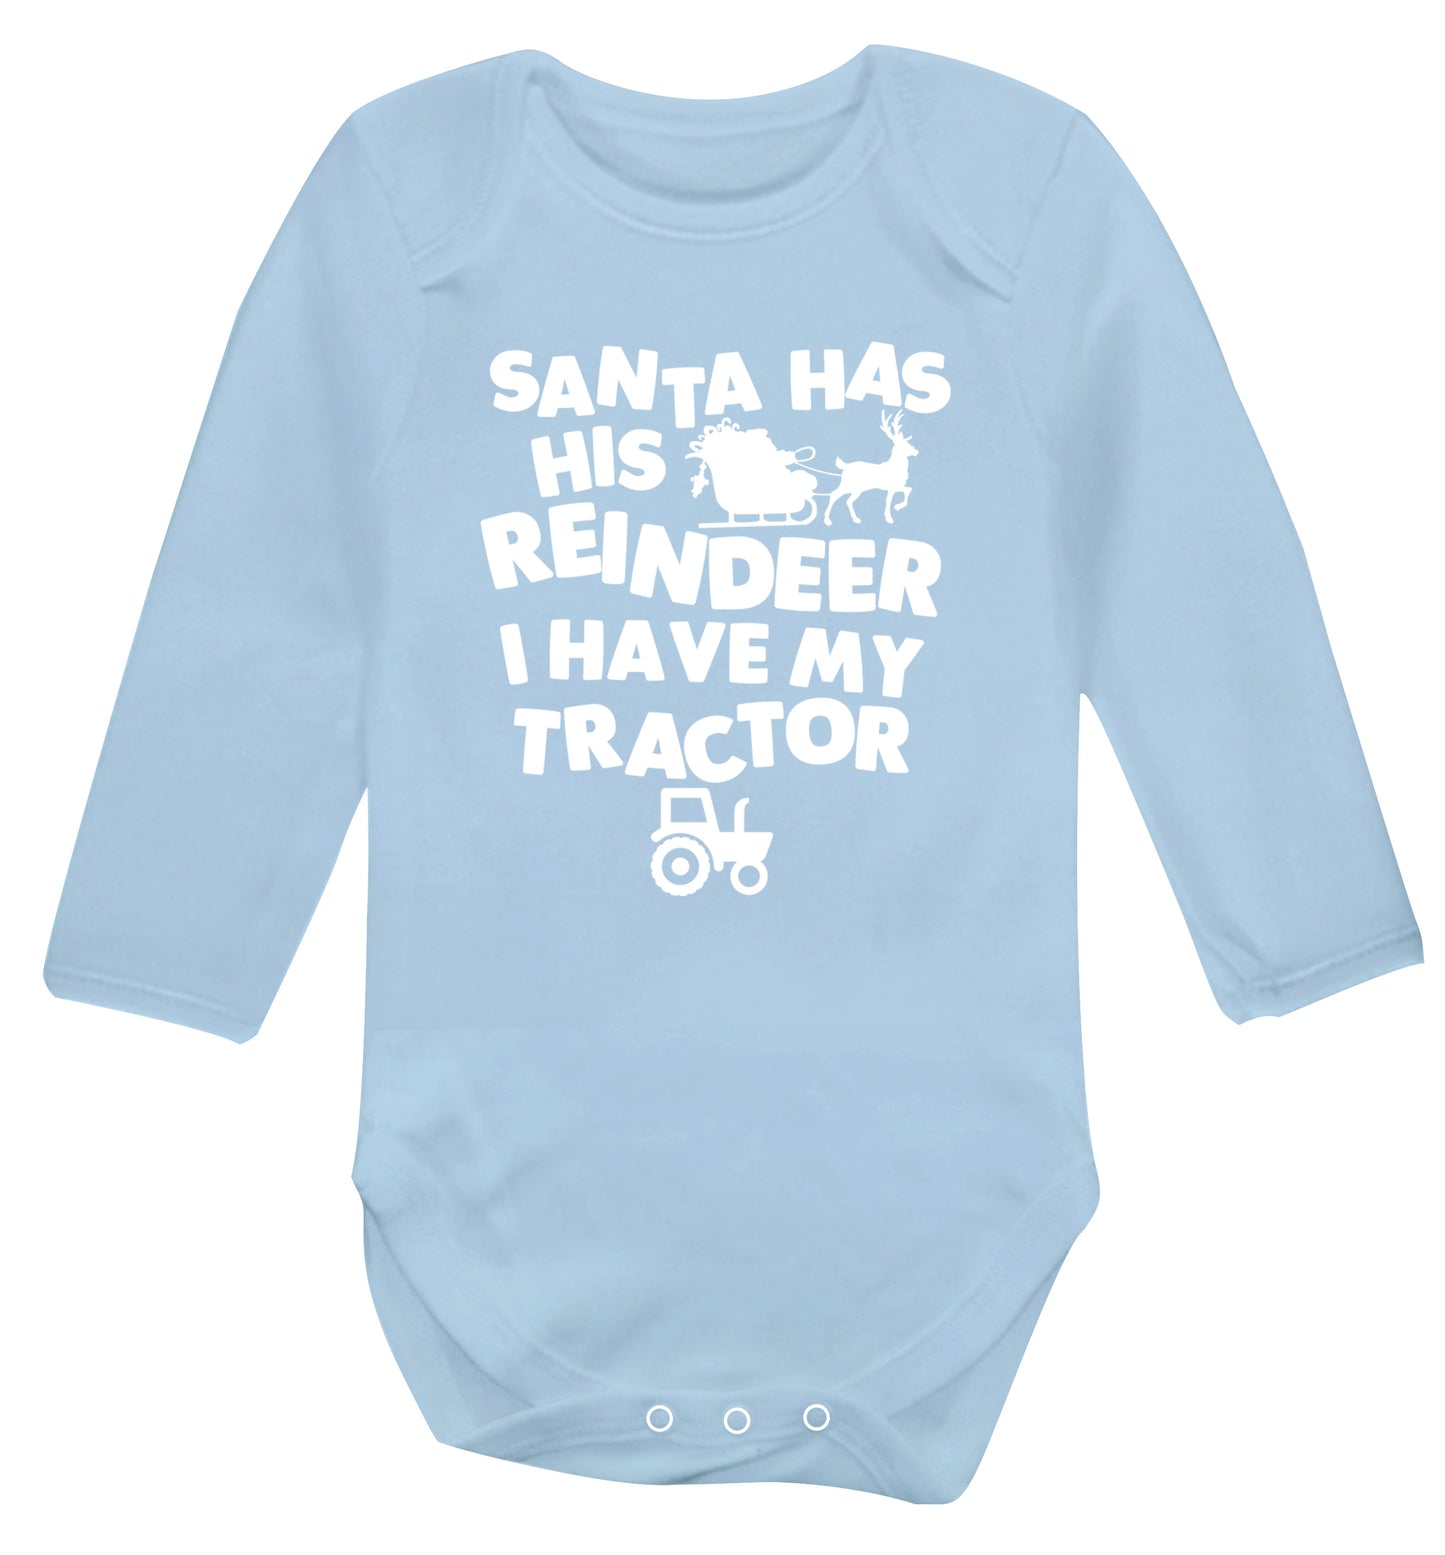 Santa has his reindeer I have my tractor Baby Vest long sleeved pale blue 6-12 months